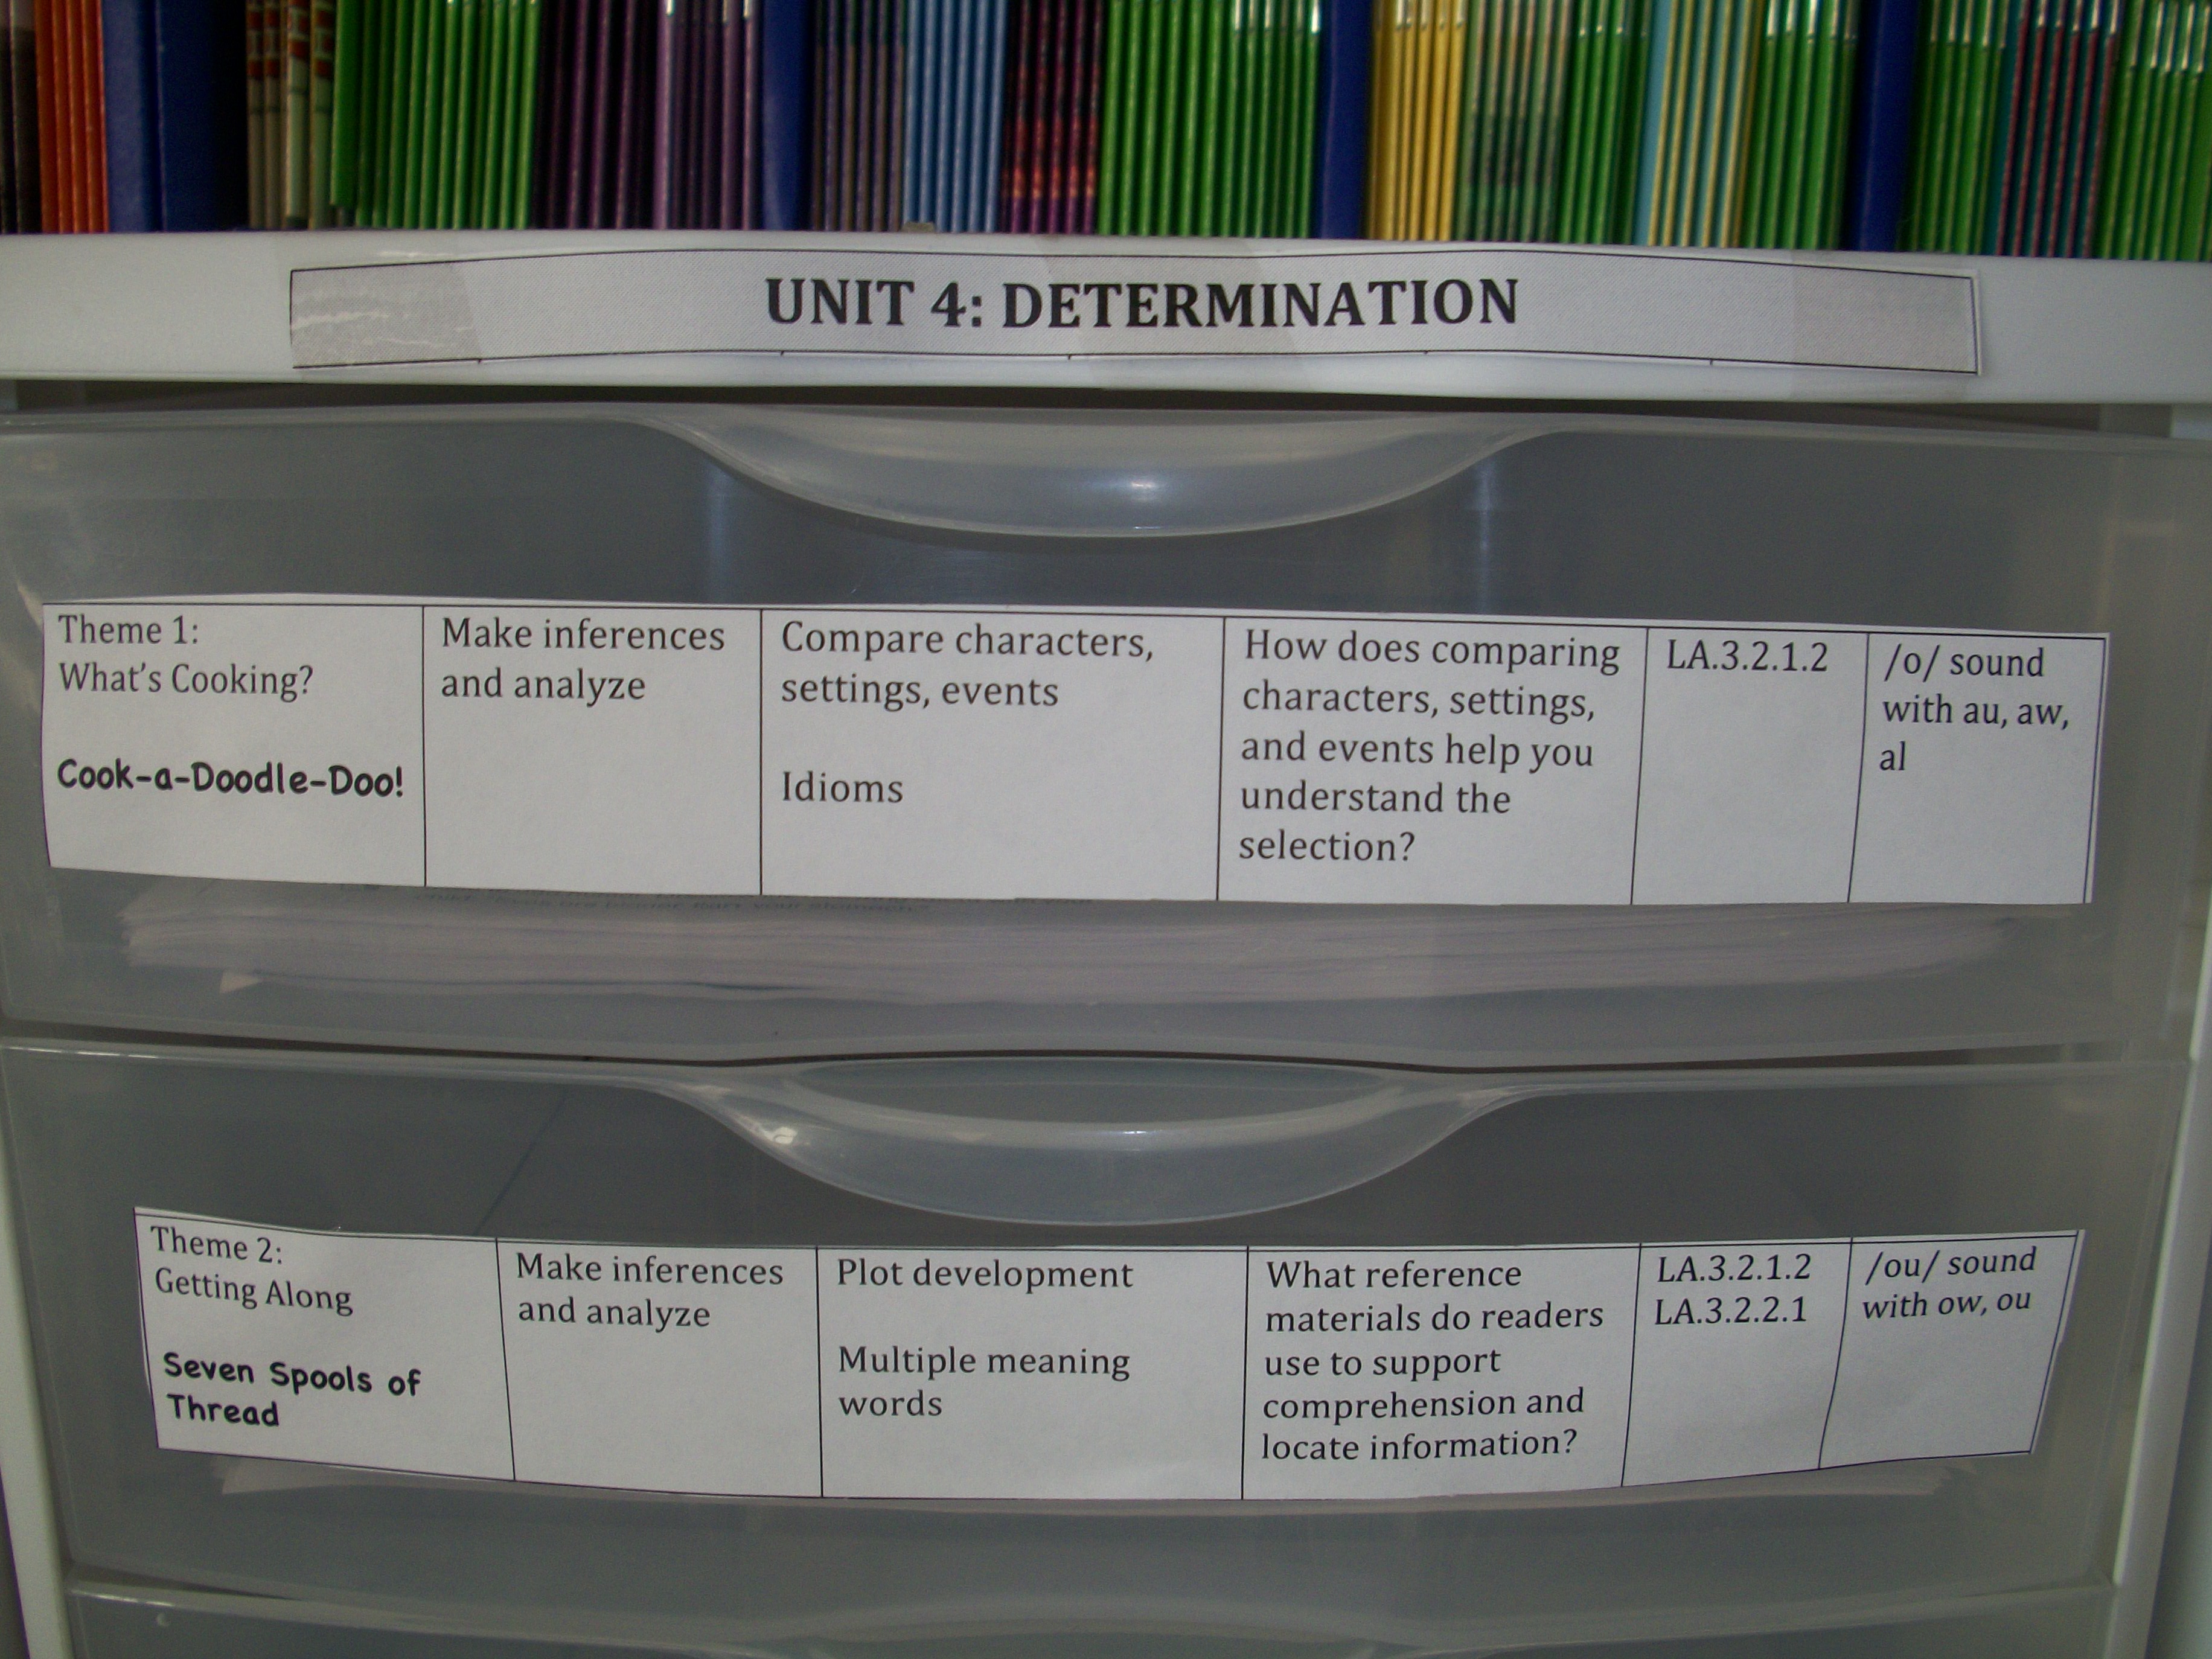  Ideas for Organizing Lesson Materials and Files